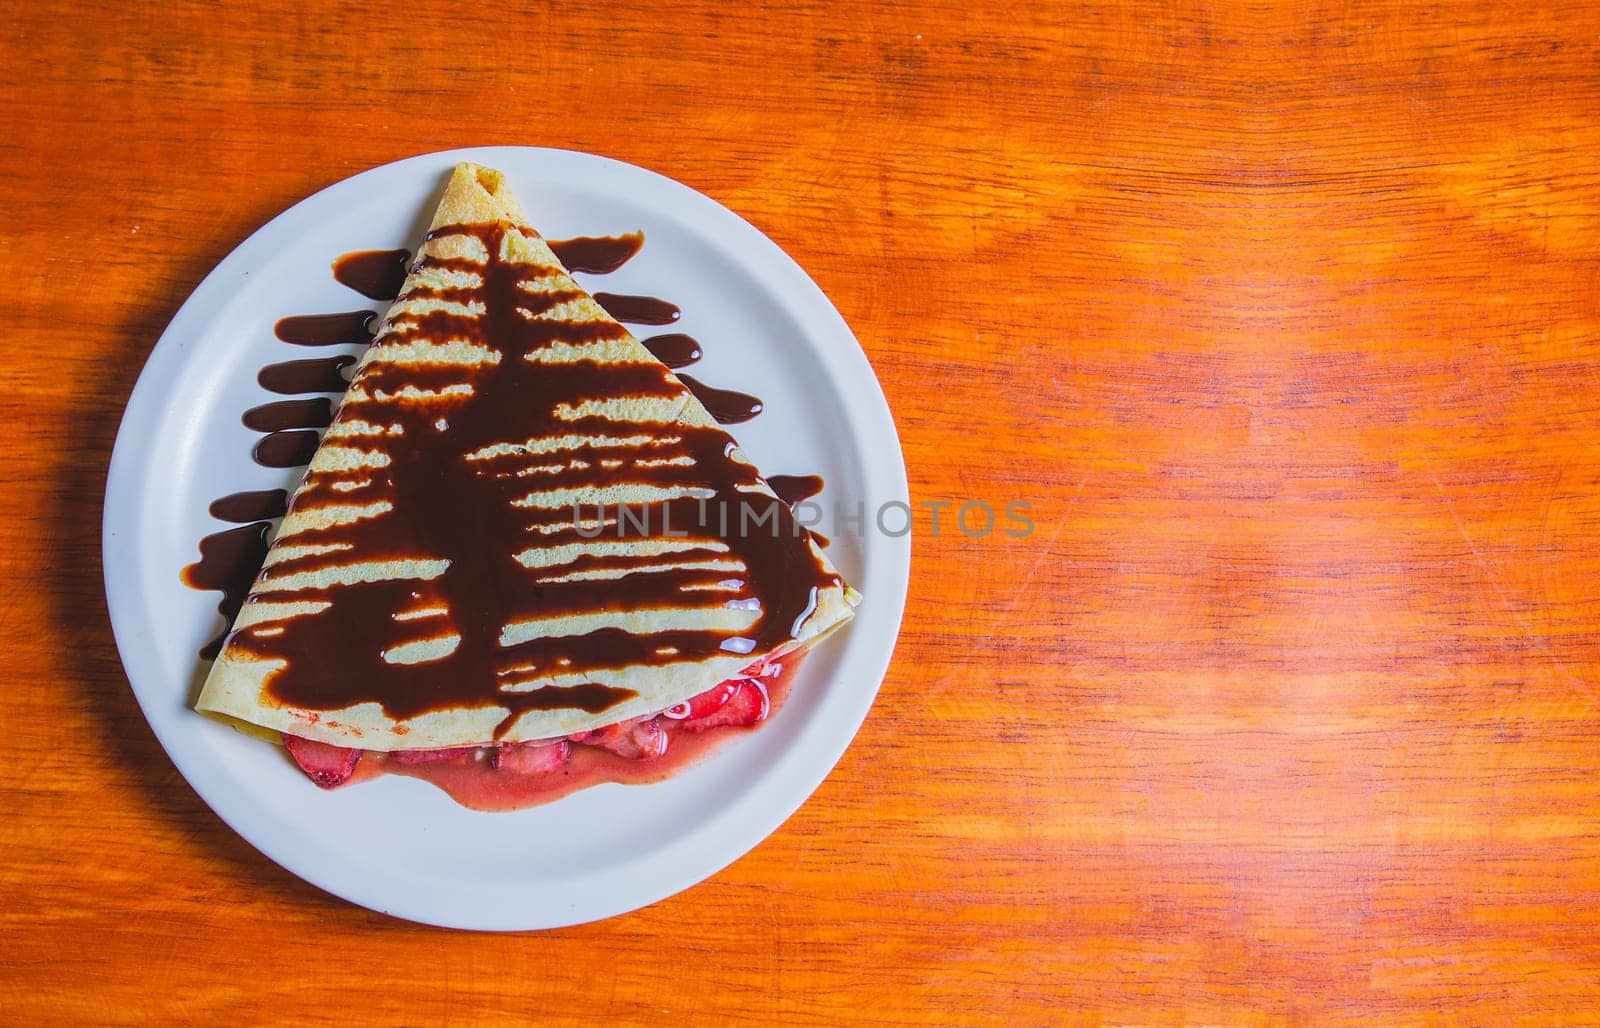 Crepe with chocolate cream and strawberry on wooden table. Sweet strawberry crepe with chocolate cream on wooden table by isaiphoto